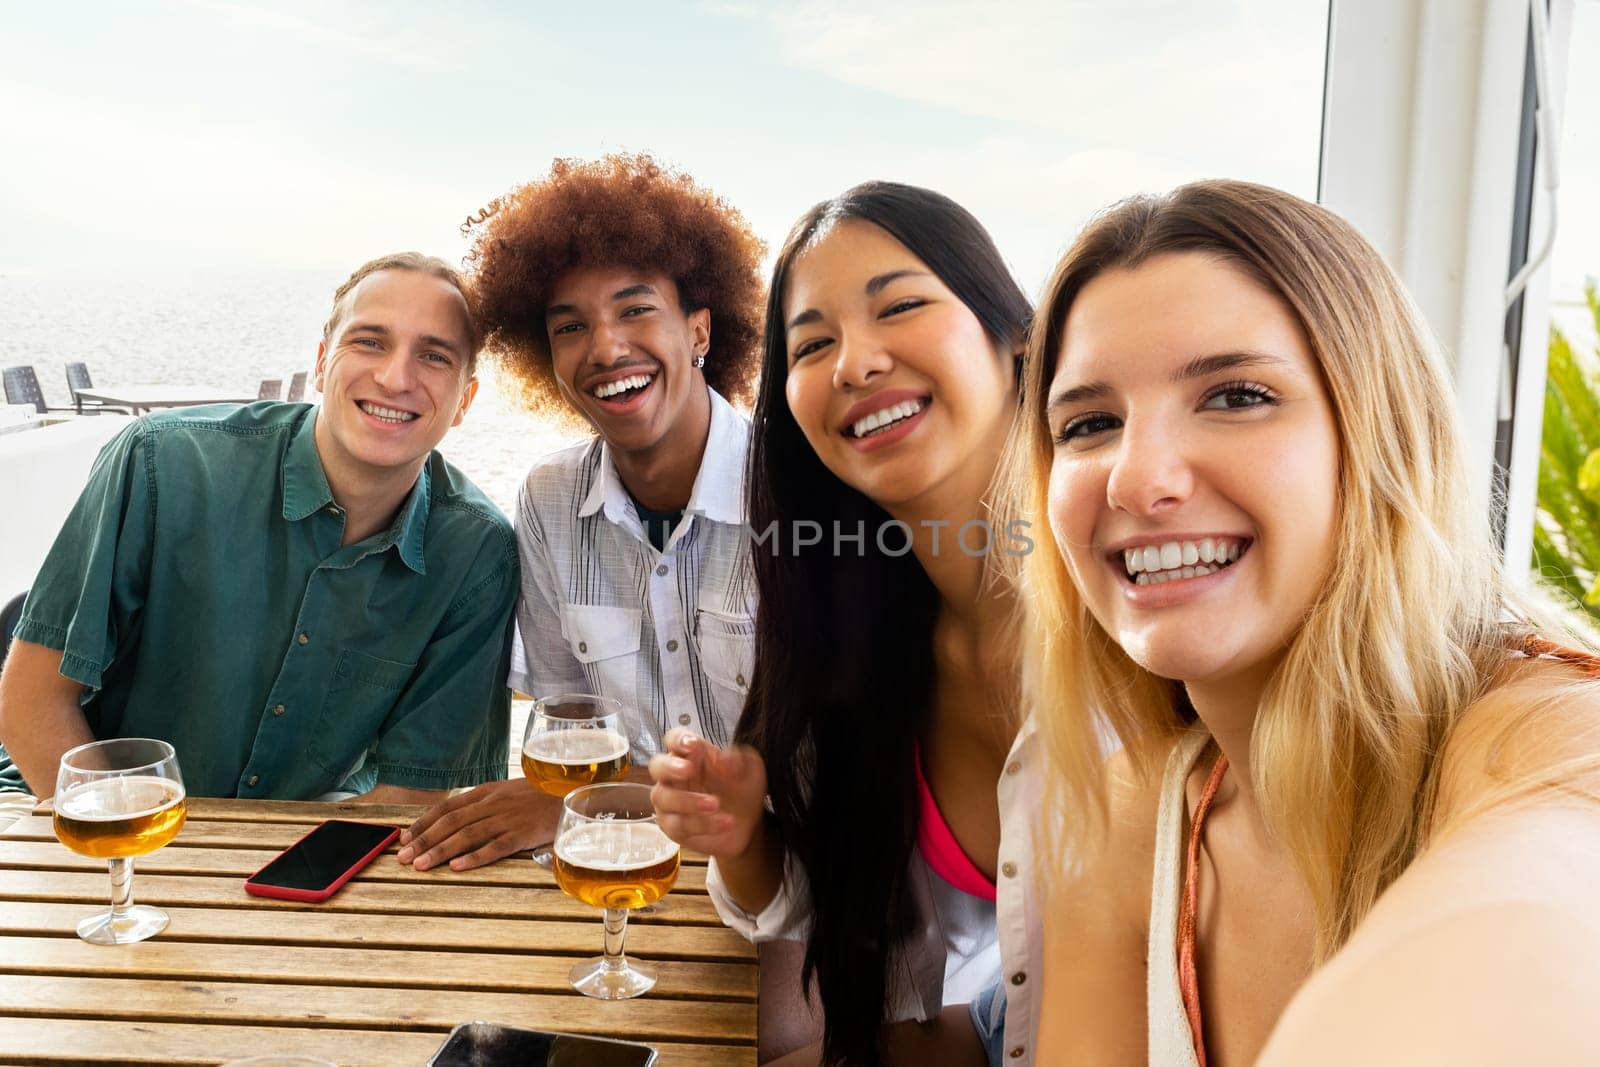 Multiracial group of friends taking selfie looking at camera while having drinks together at beach bar. Lifestyle and summertime concept.